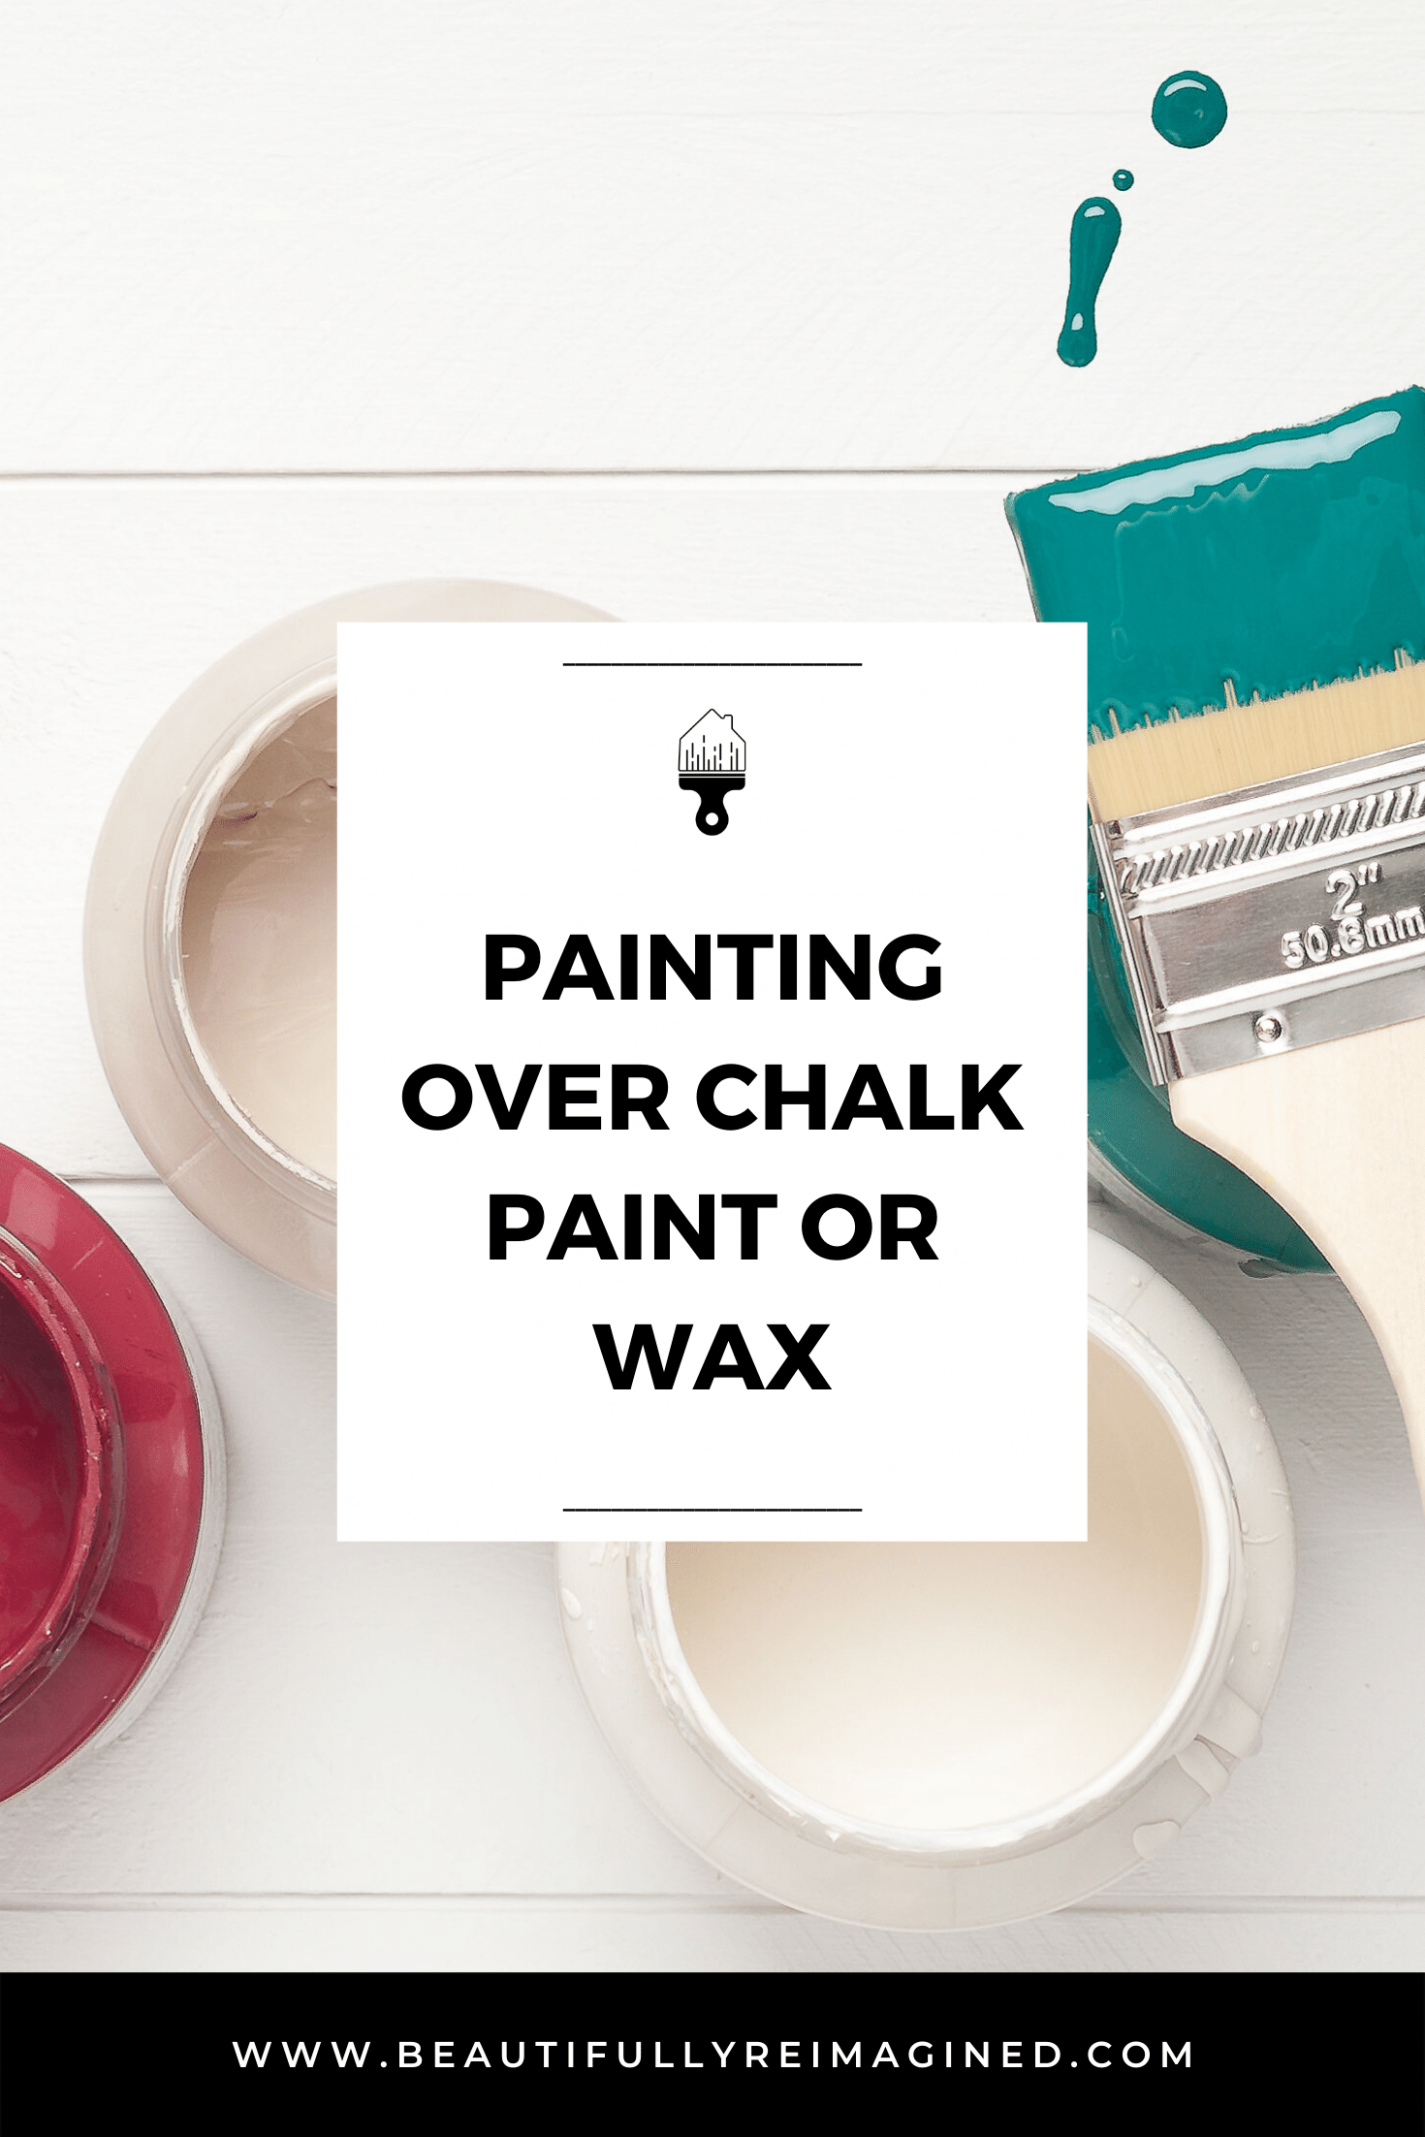 Painting Over Chalk Paint Or Wax | Beautifully Reimagined Can You Use Chalk Paint Over Existing Paint